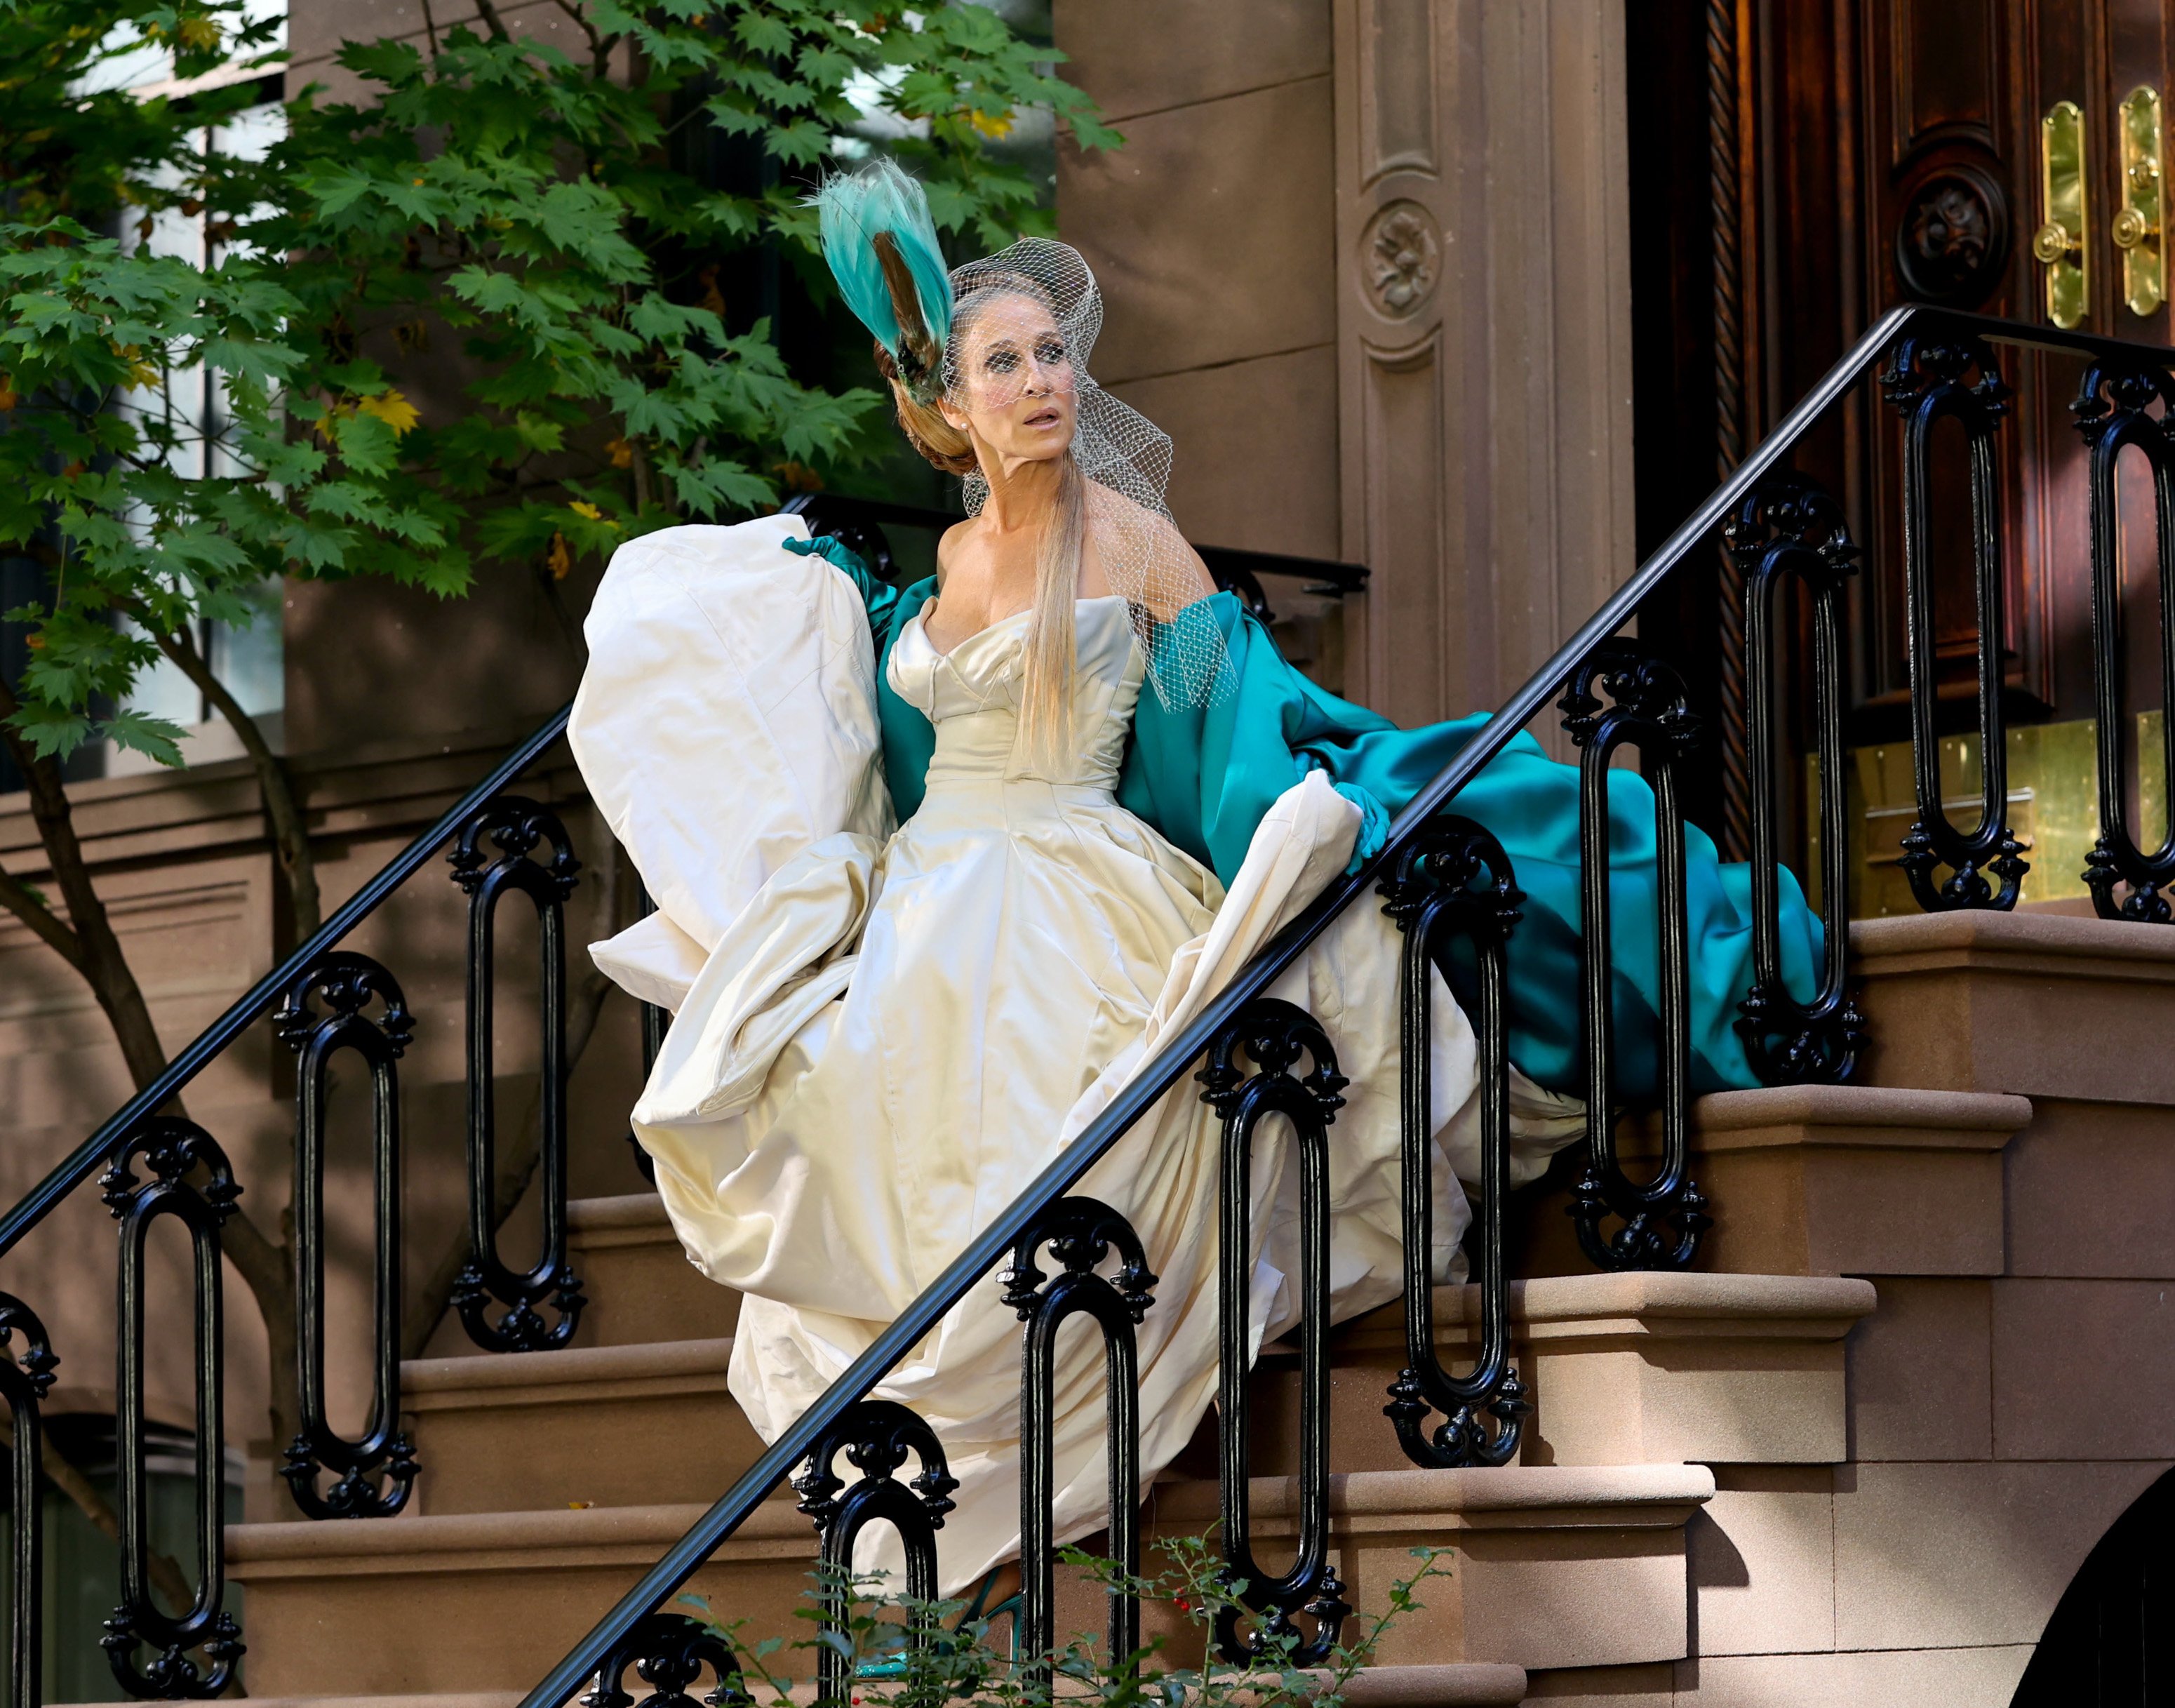 Sarah Jessica Parker is seen on the set of "And Just Like That..." season 2 on November 03, 2022